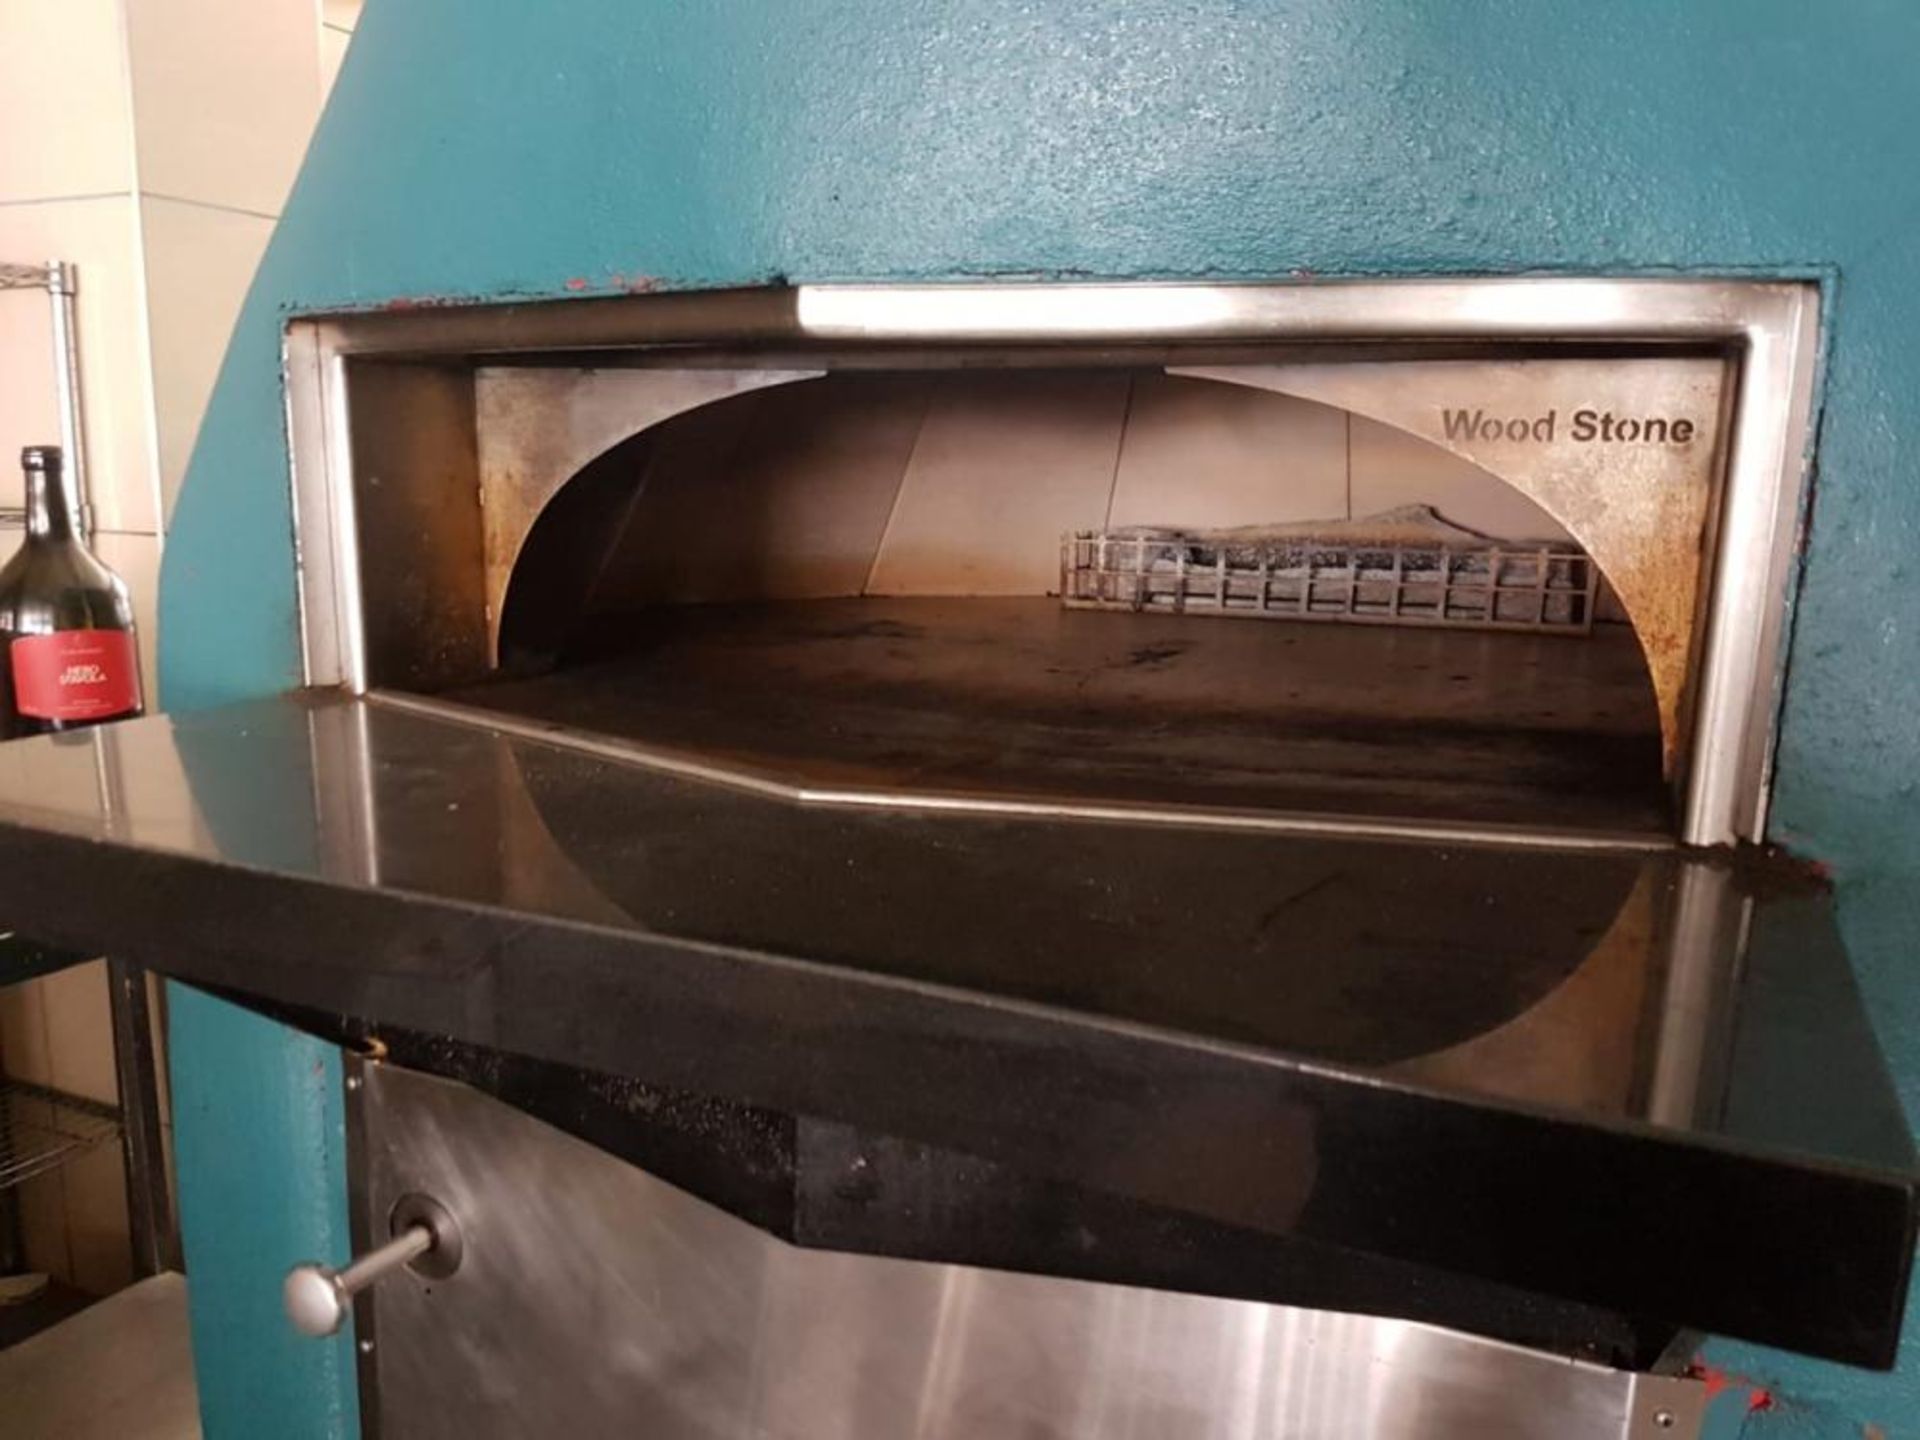 1 x Wood Stone Mountain Series Commercial Gas Fired Artisan Pizza Oven With Insulated Clad Body - - Image 8 of 13